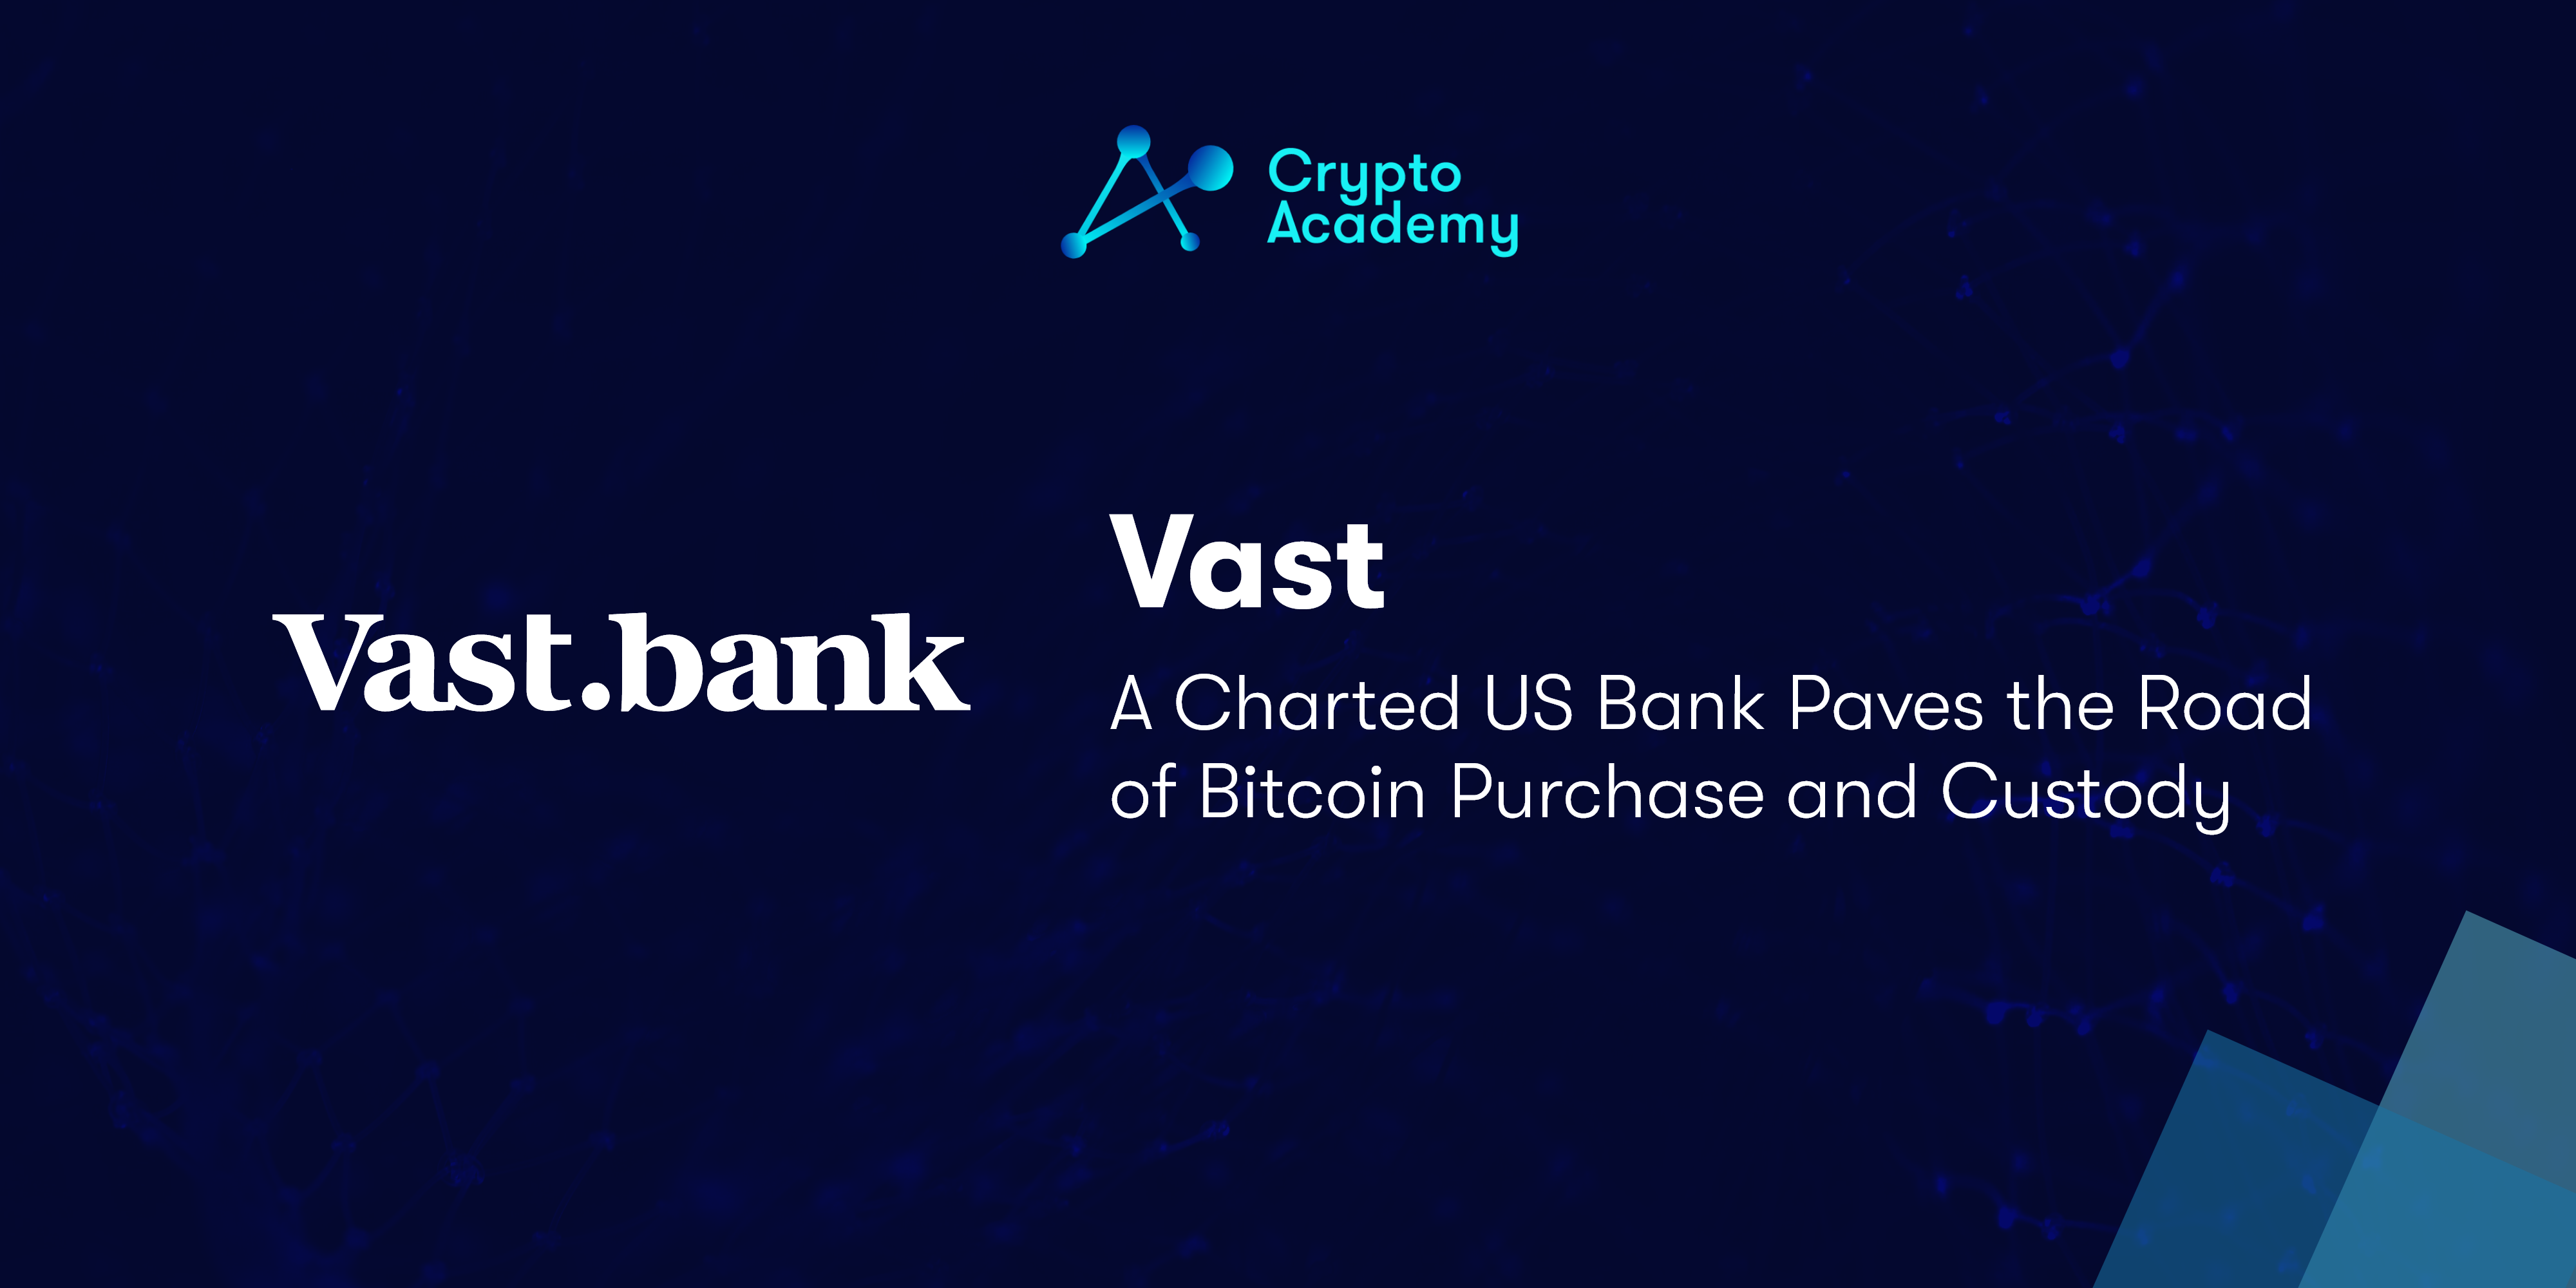 Vast, a Charted US Bank Paves the Road of Bitcoin Purchase and Custody